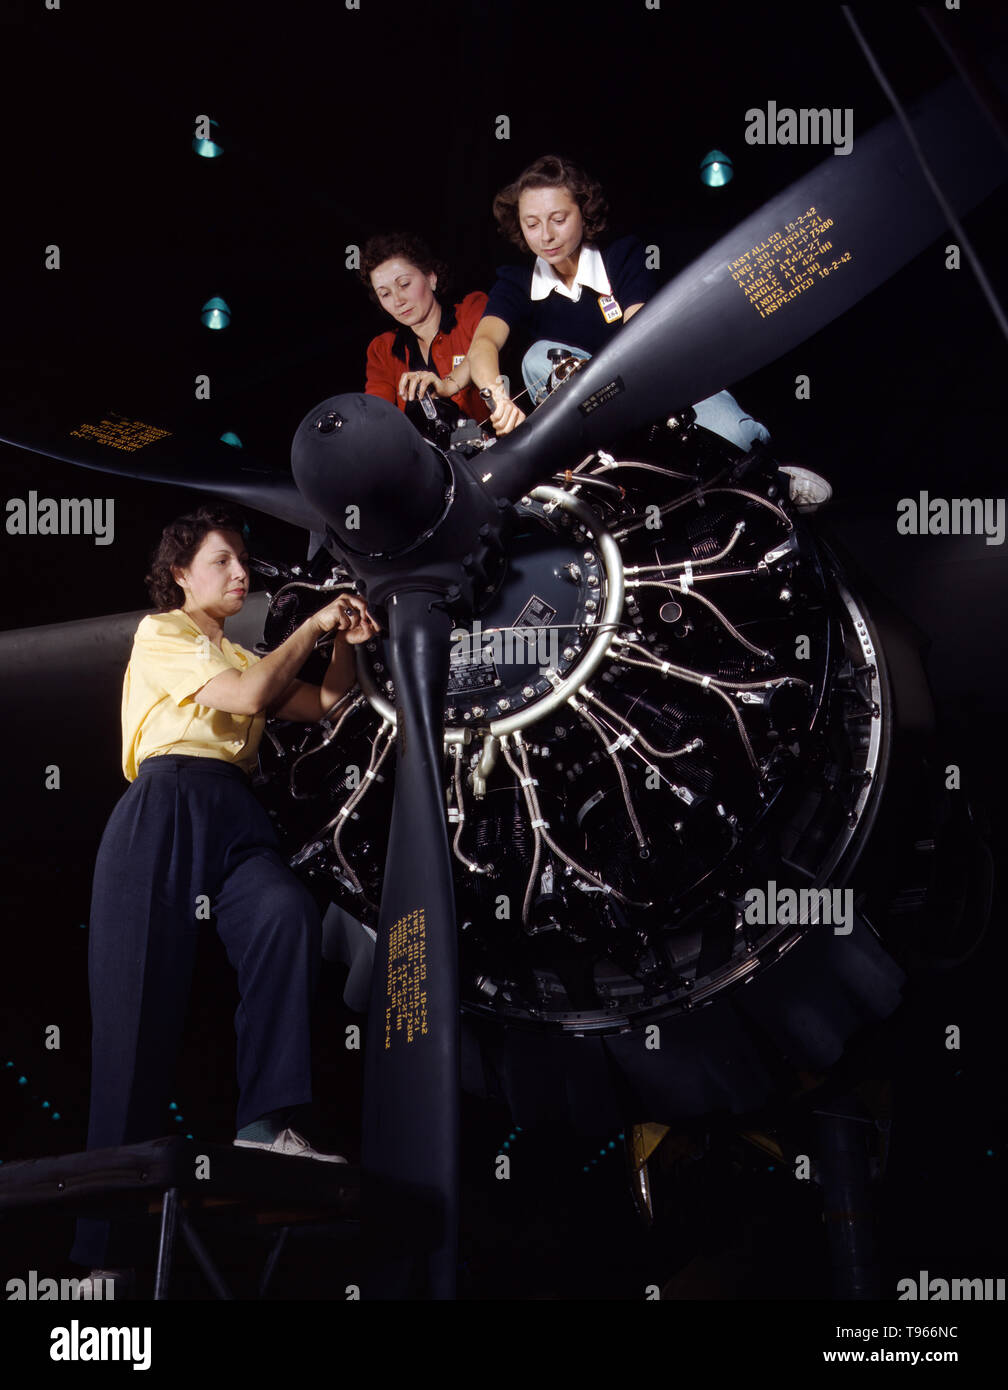 Women at work on C-47 Douglas cargo transport, Douglas Aircraft Company, Long Beach, California. Although the image of 'Rosie the Riveter' reflected the industrial work of welders and riveters, the majority of working women filled non-factory positions in every sector of the economy. What unified the experiences of these women was that they proved to themselves, and the country, that they could do a man's job and could do it well. Photographed by Alfred T. Palmer, 1942. Stock Photo